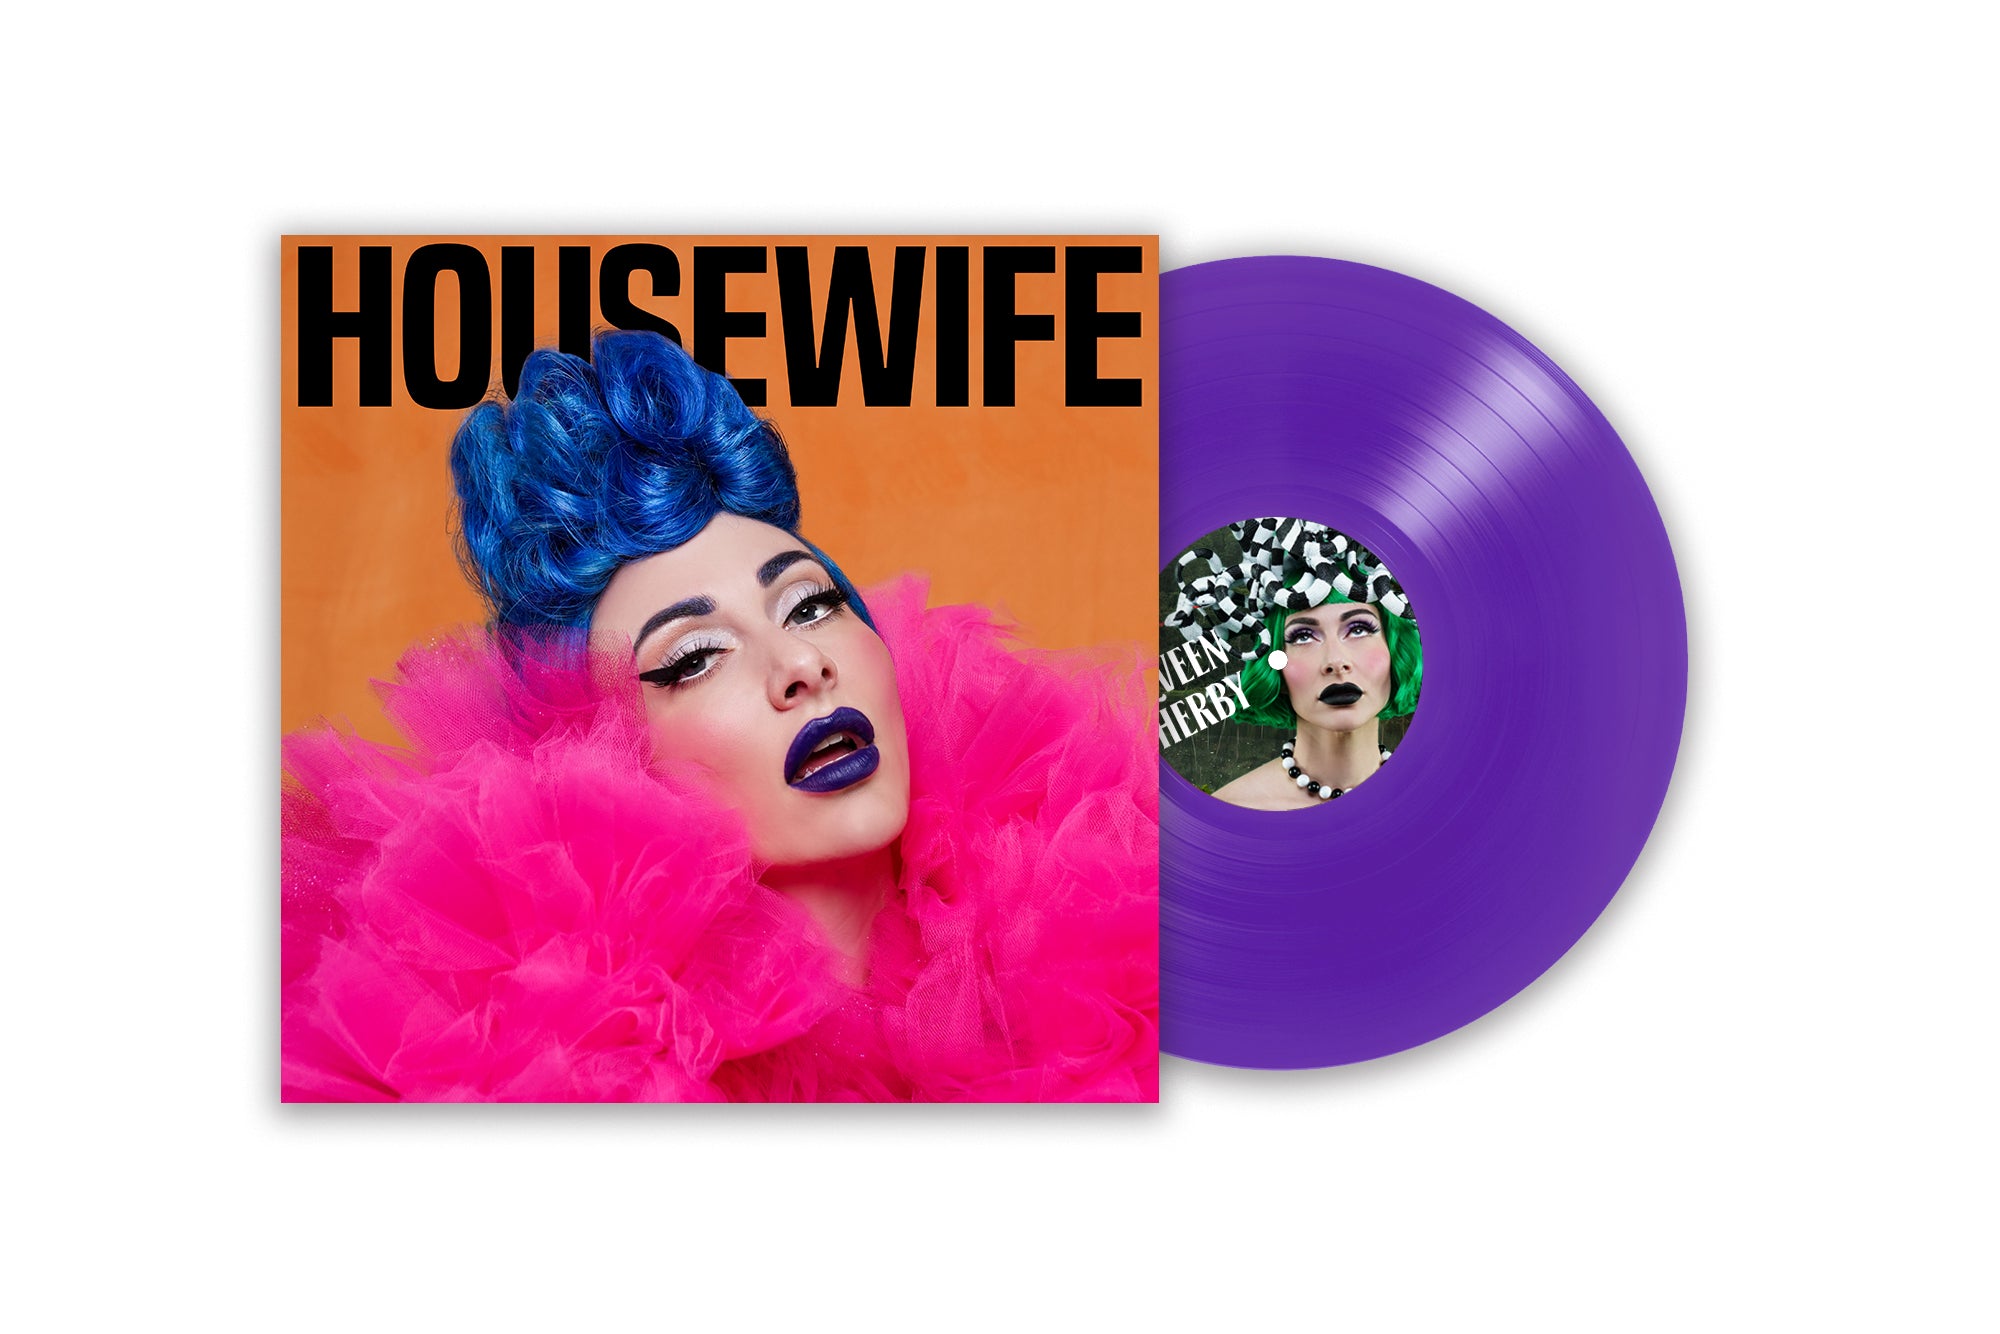 Muse/Housewife [Vinyl] PRE-ORDER – Qveen Herby